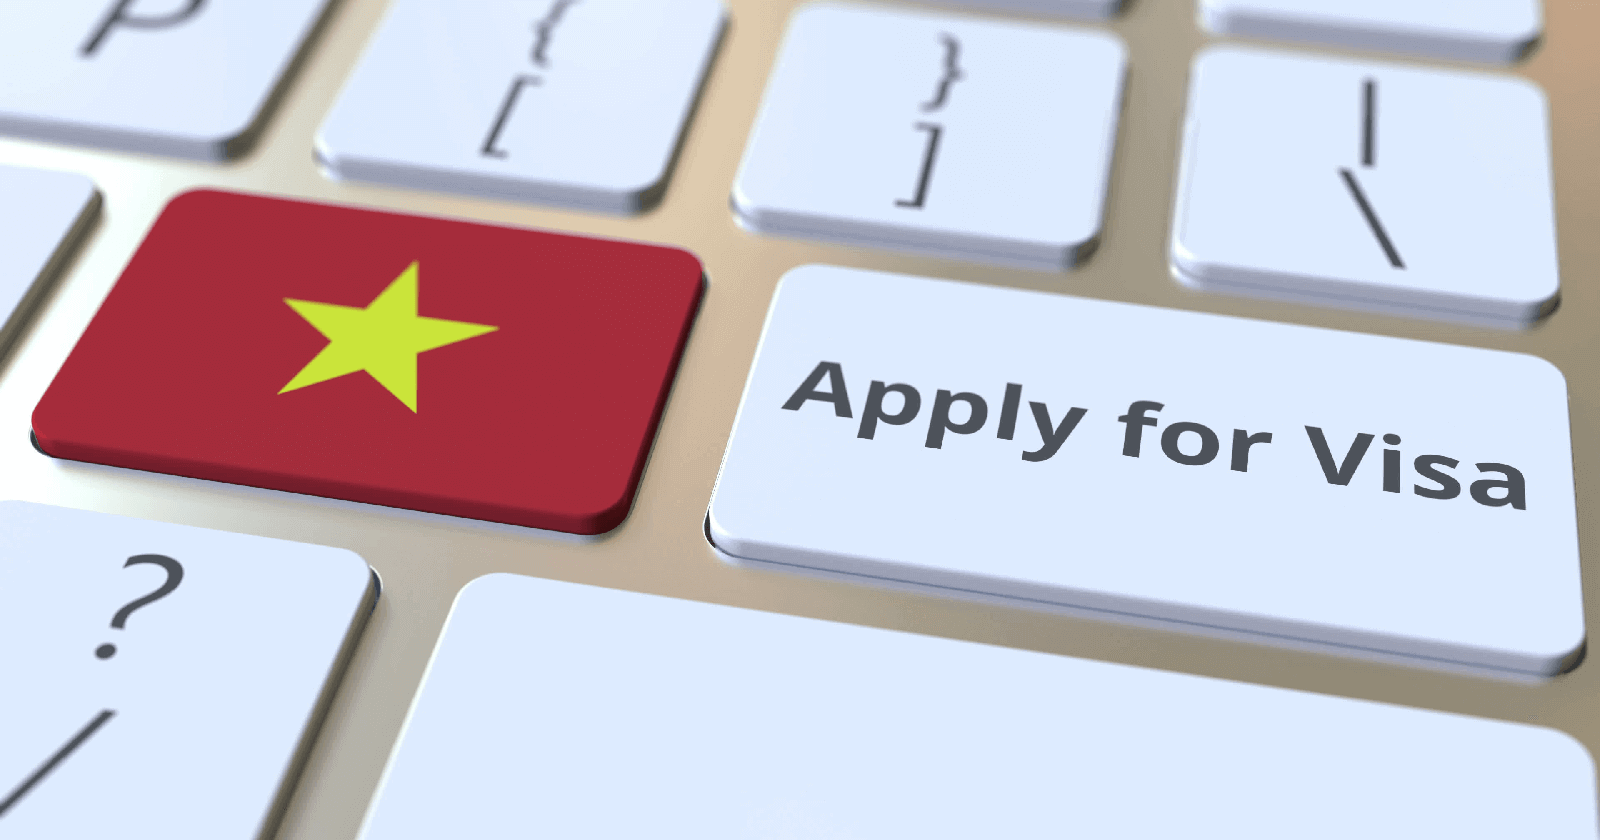 Step-by-Step Guide to Obtaining a Vietnam Visa from Bangalore, India